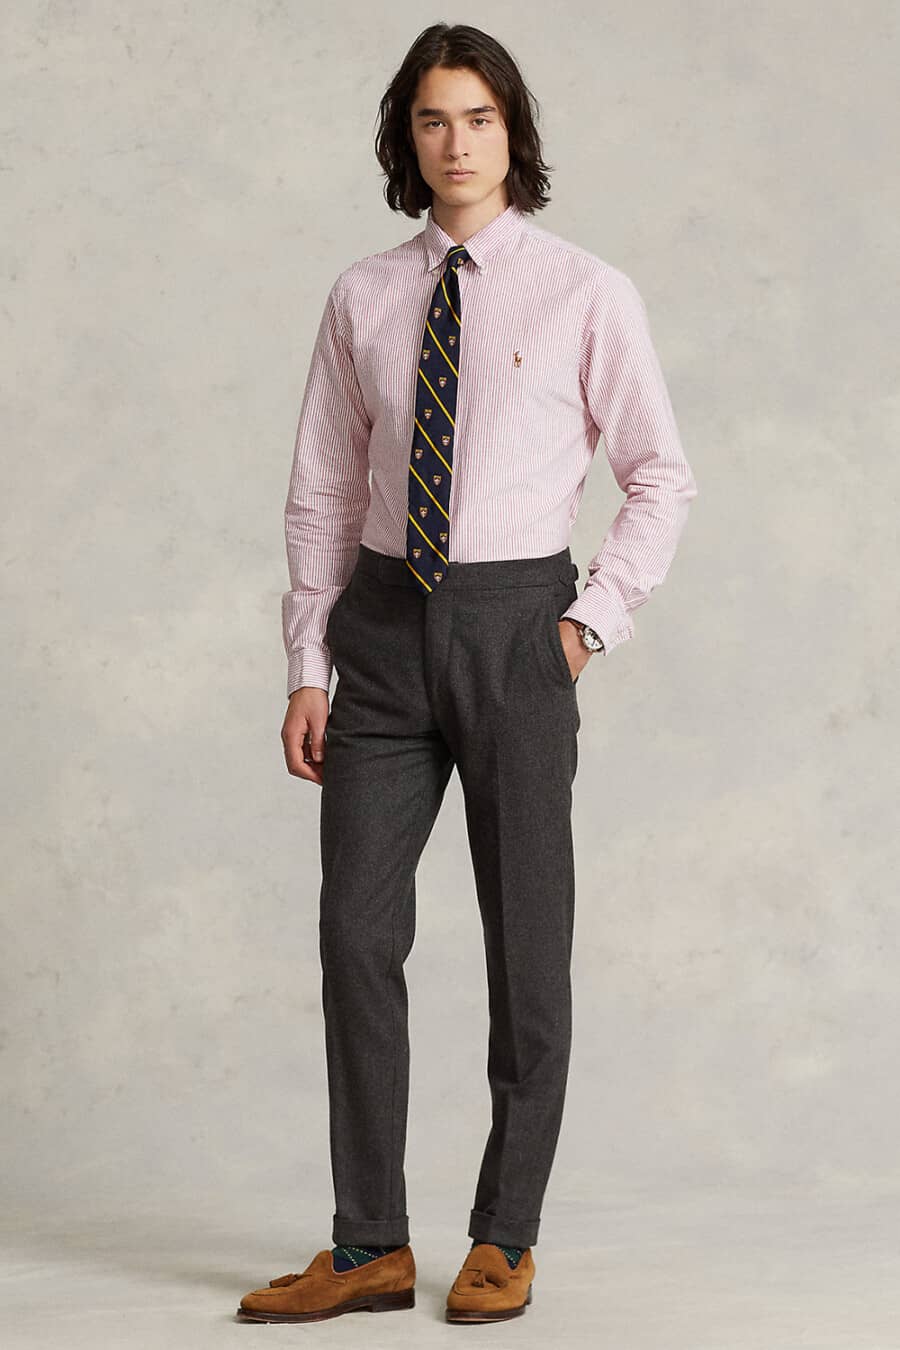 Men's charcoal dress pants, pink striped dress shirt, navy and yellow club tie and tan suede loafers outfit